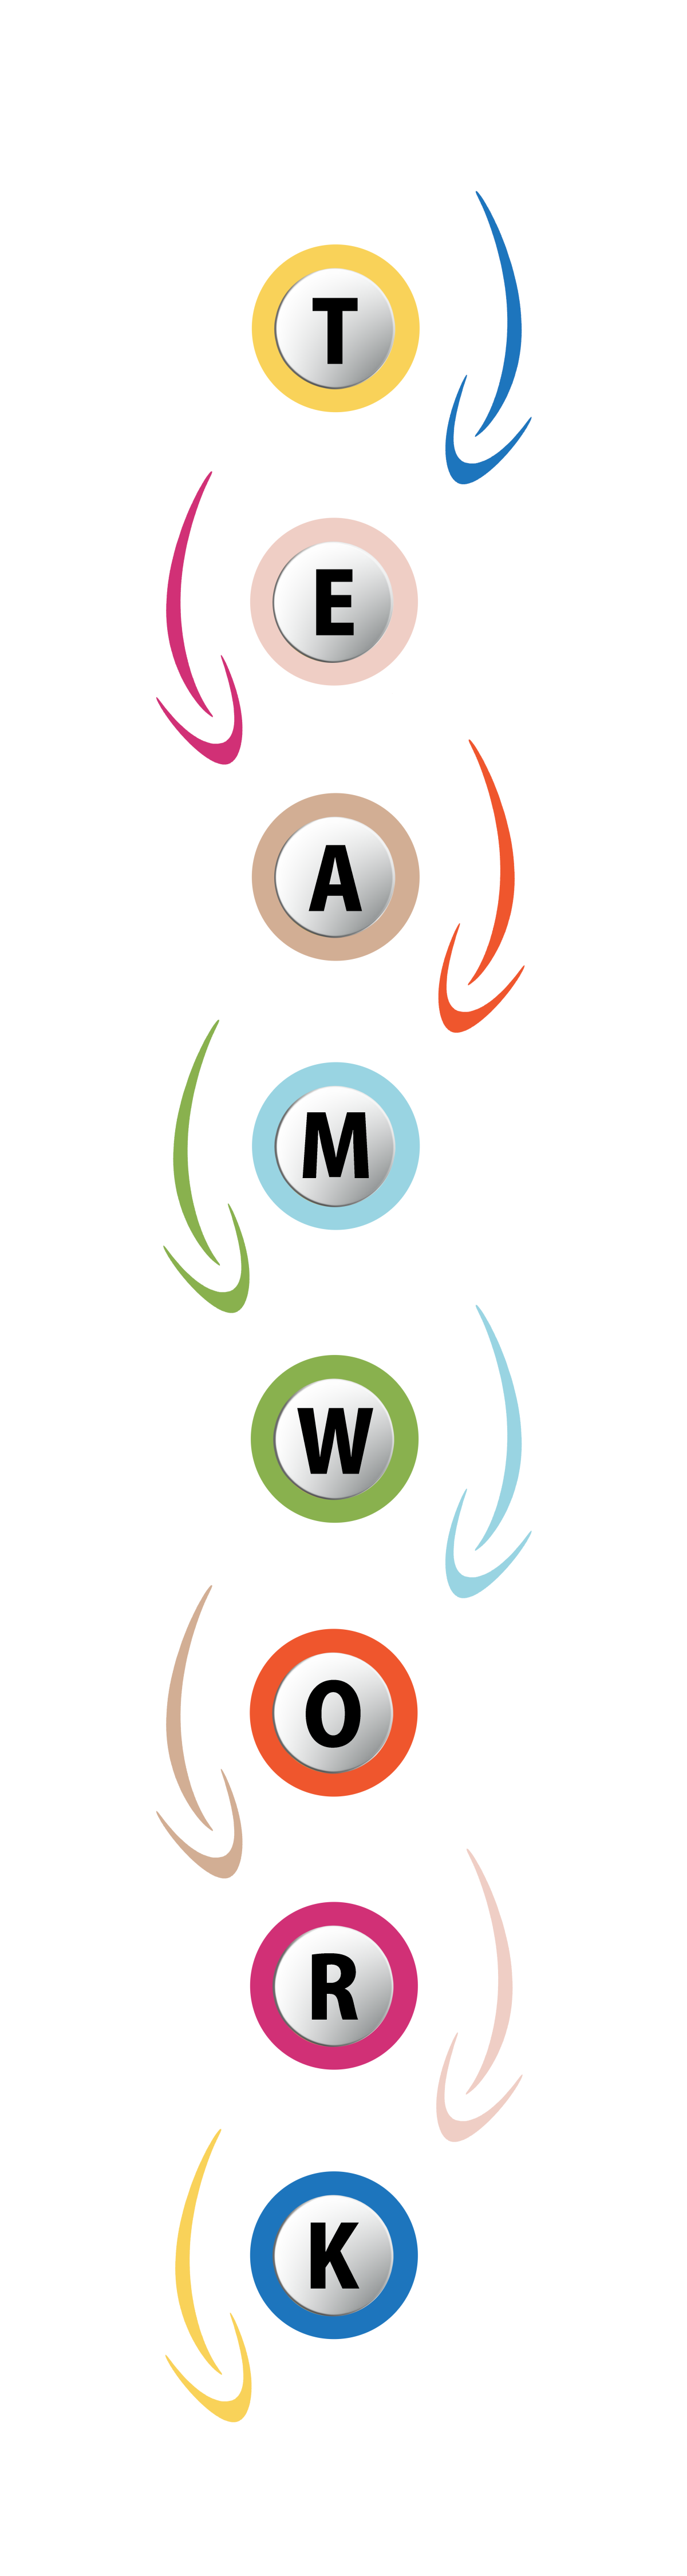 The word teamwork of letters arranged one below the other in colorful circles, connected with colorful arrows, alternating left and right, from circle to circle